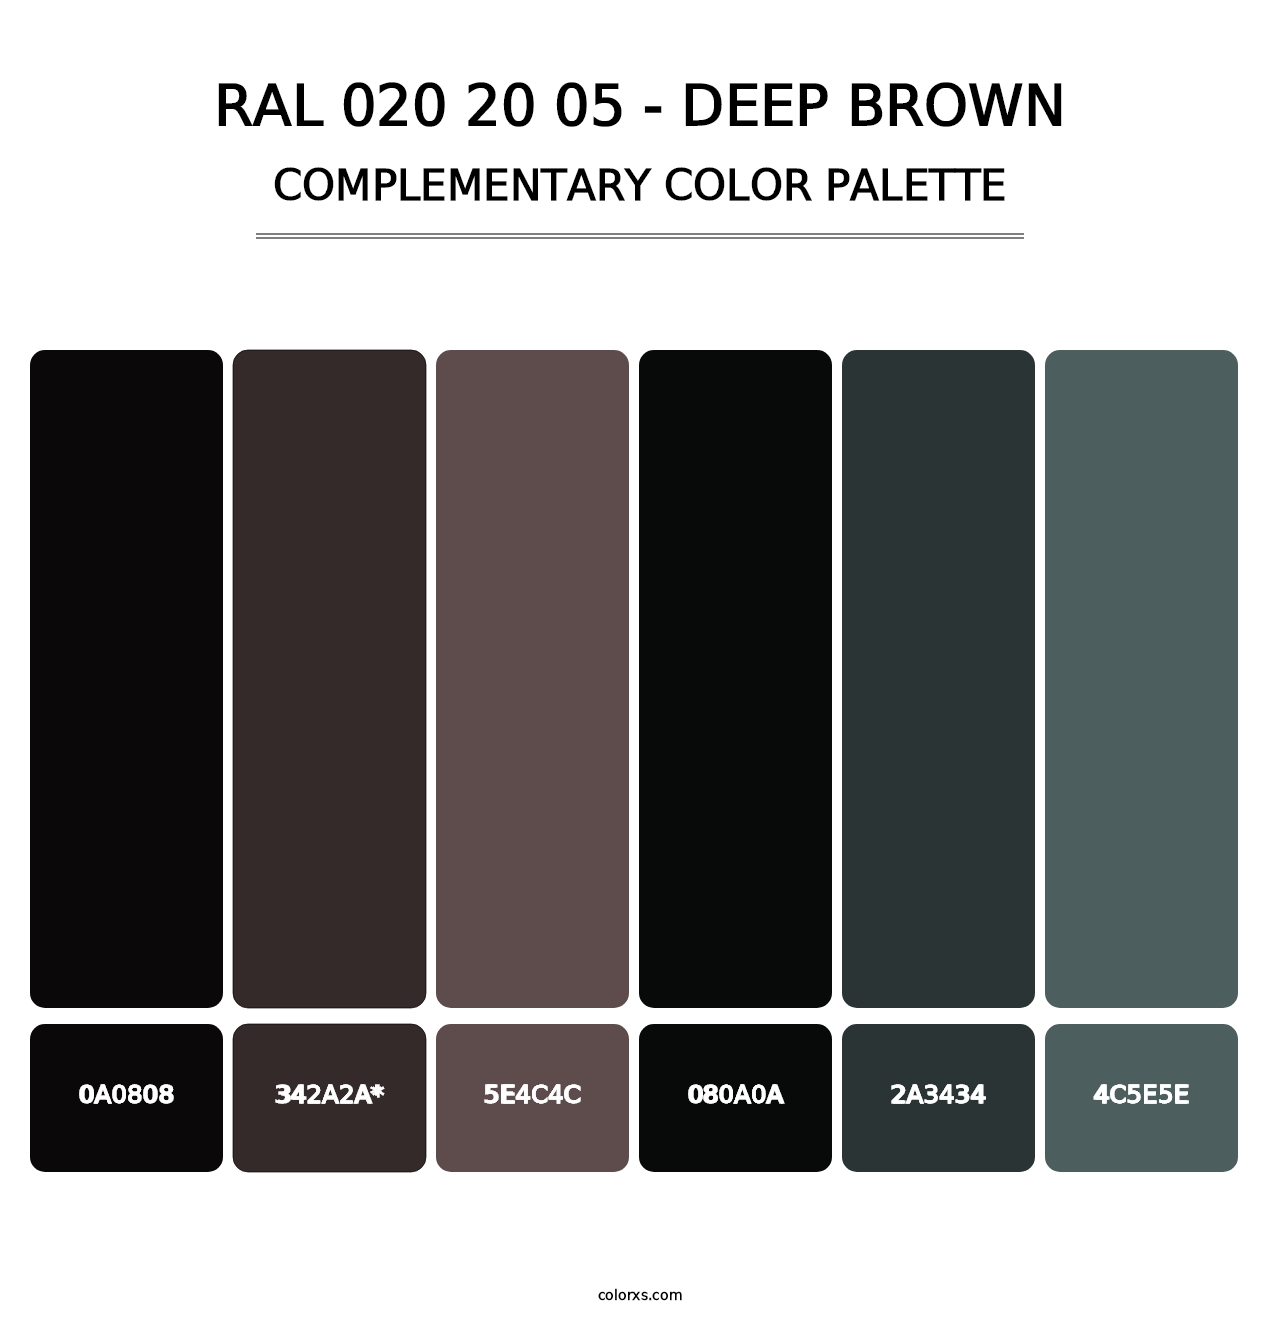 RAL 020 20 05 - Deep Brown - Complementary Color Palette